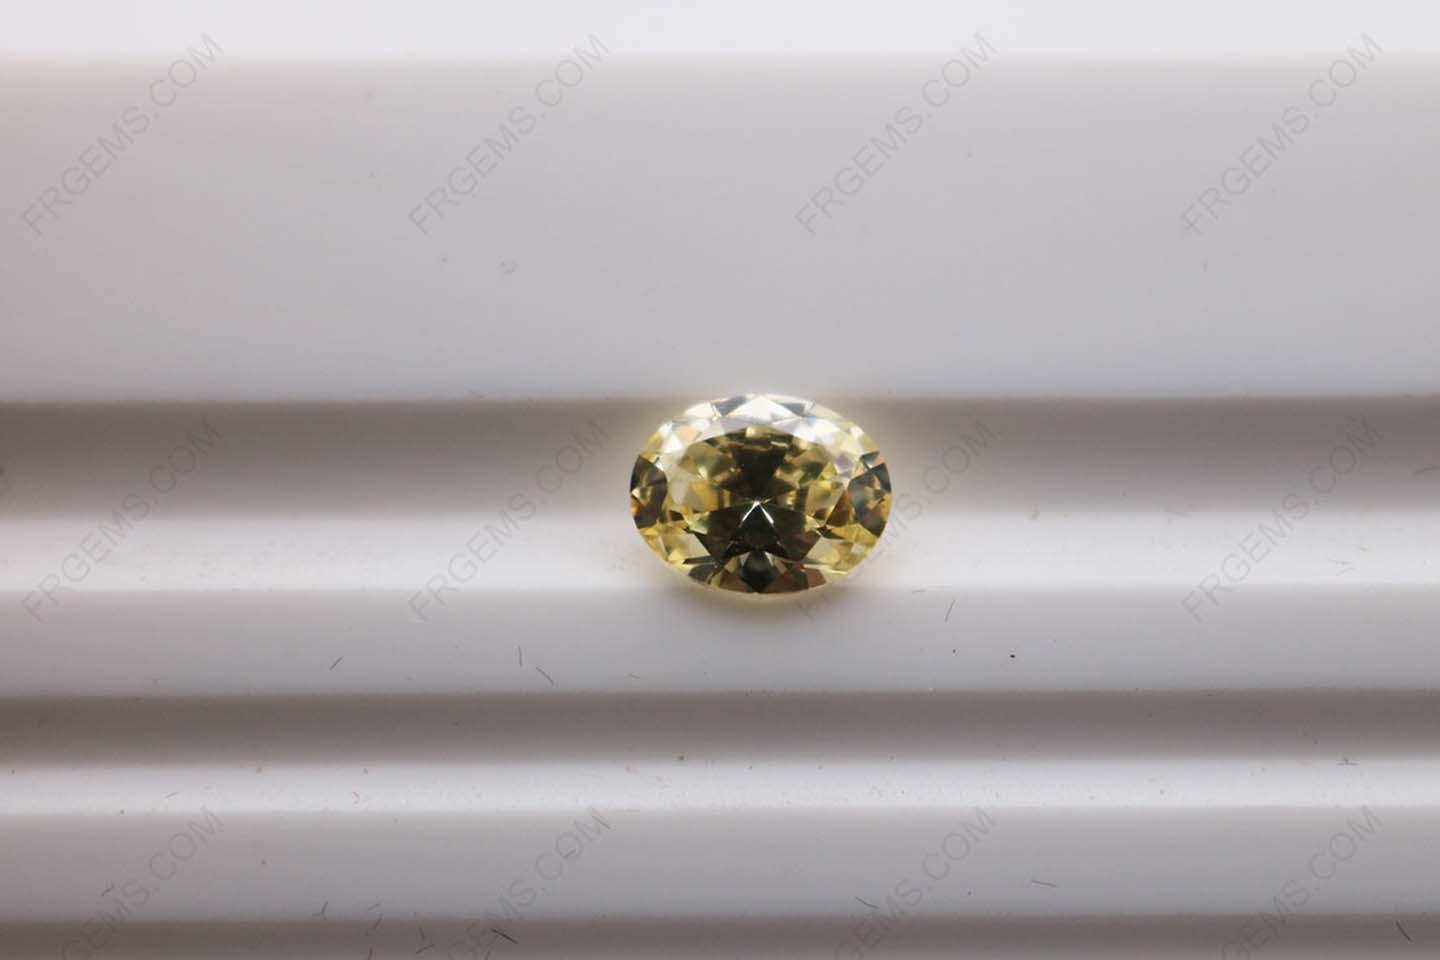 Cubic Zirconia Canary Yellow 3A Oval Shape diamond faceted Cut 10x8mm stones CZ06 IMG_3917